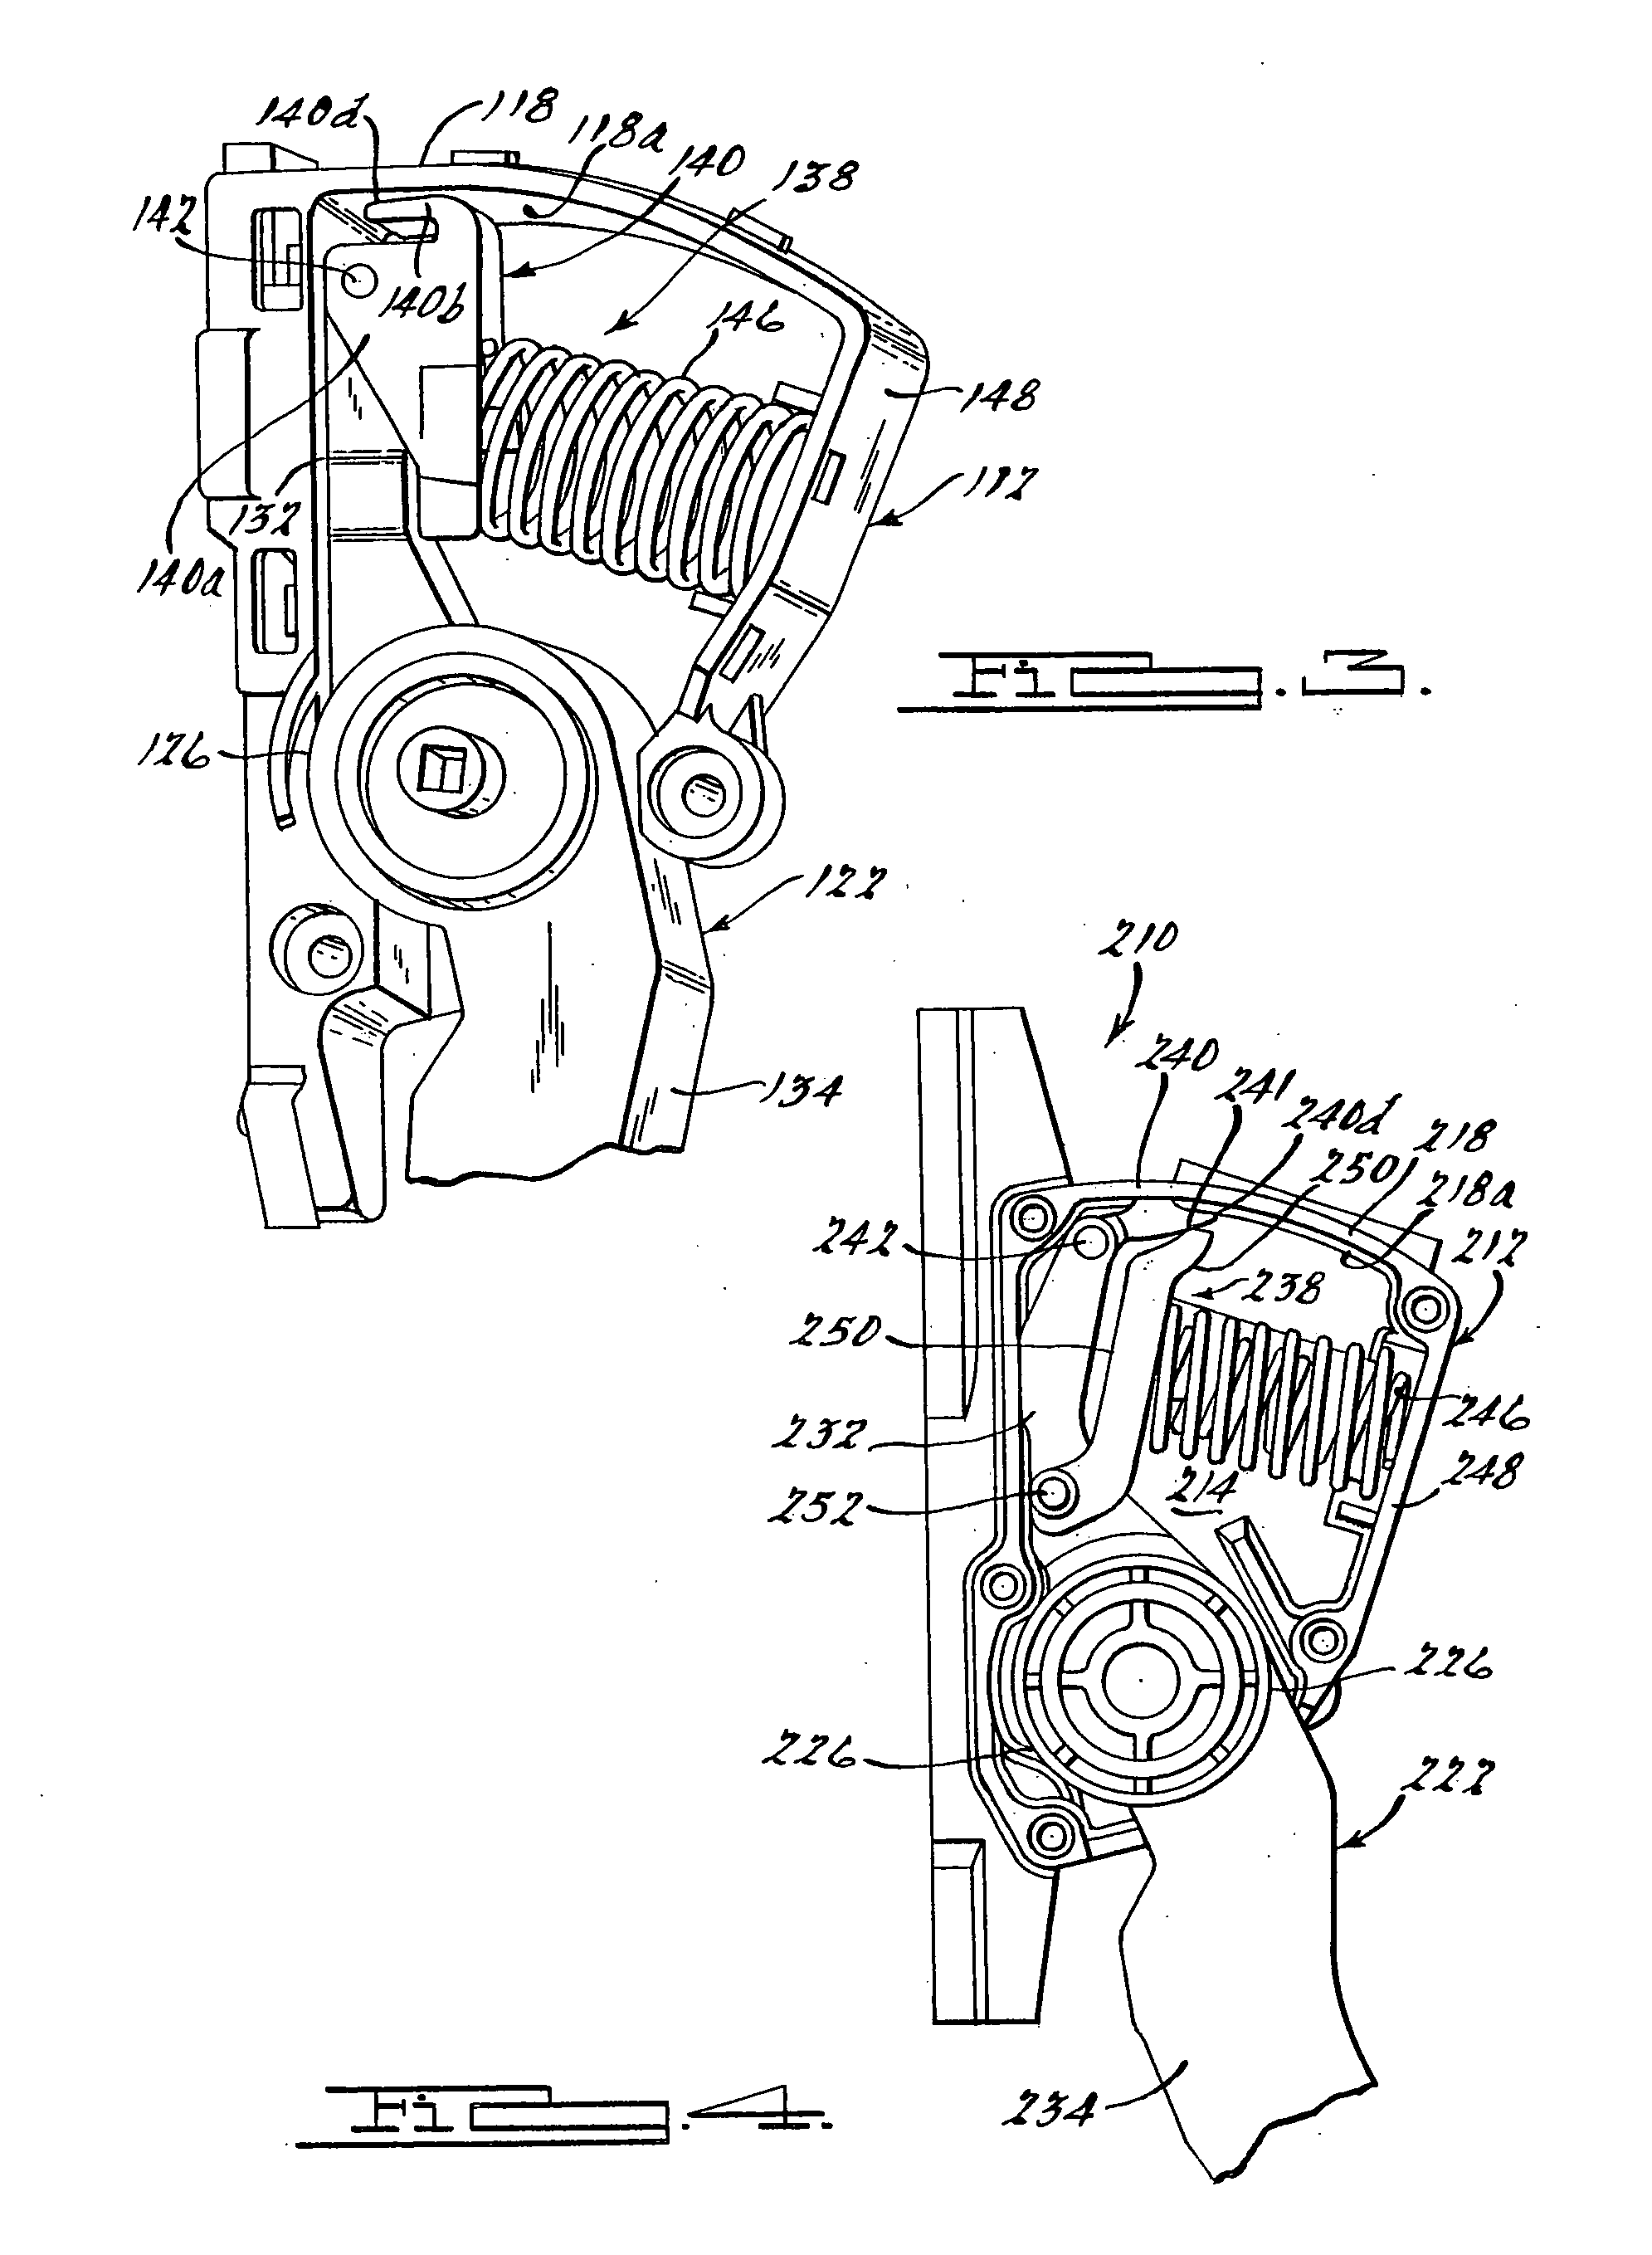 Electronic throttle control with hysteresis device